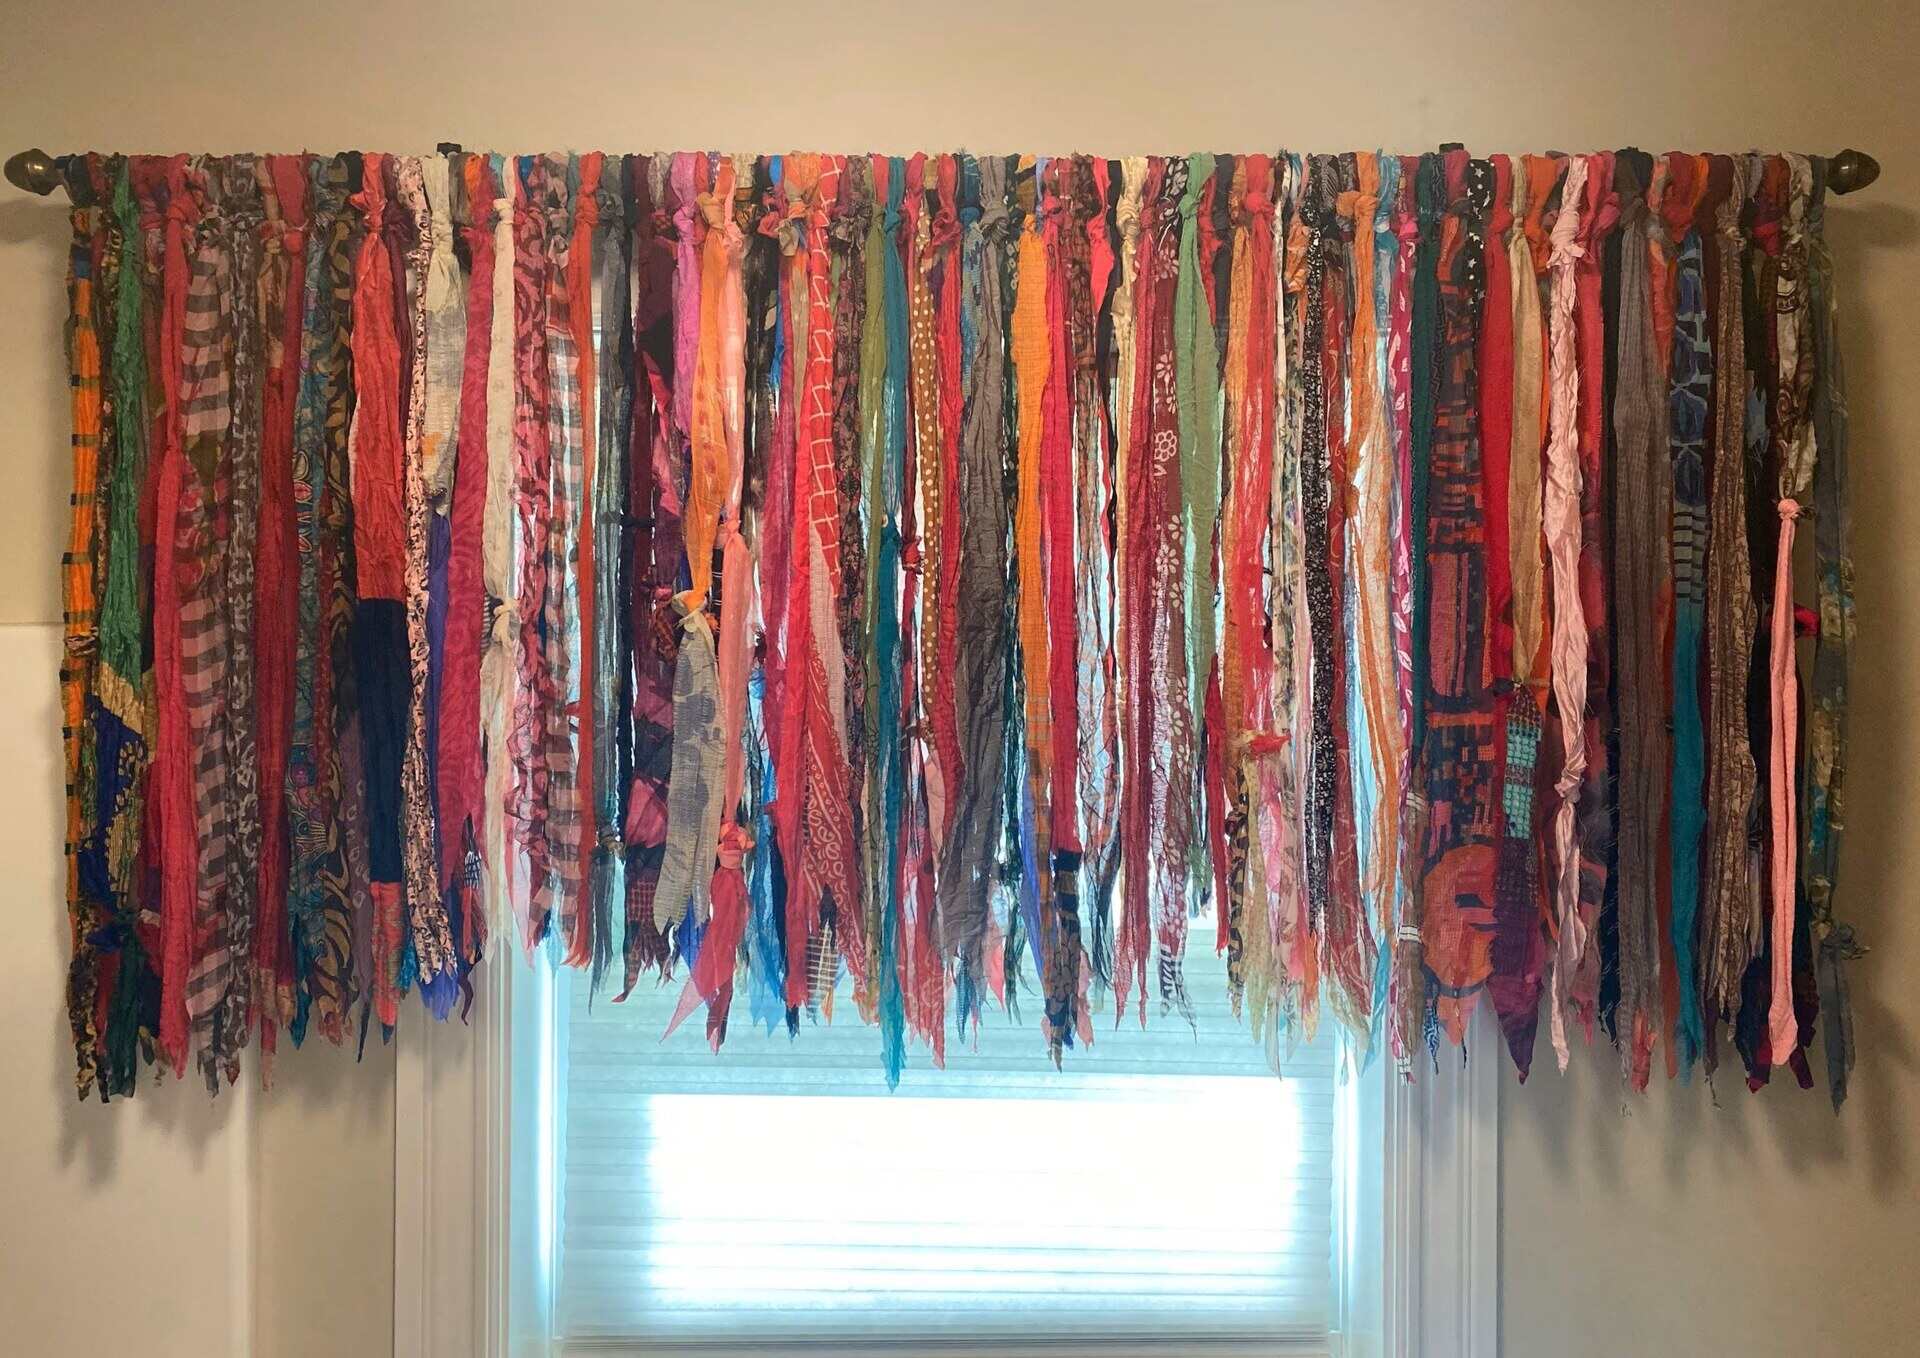 How To Make Gypsy Rag Curtains Storables